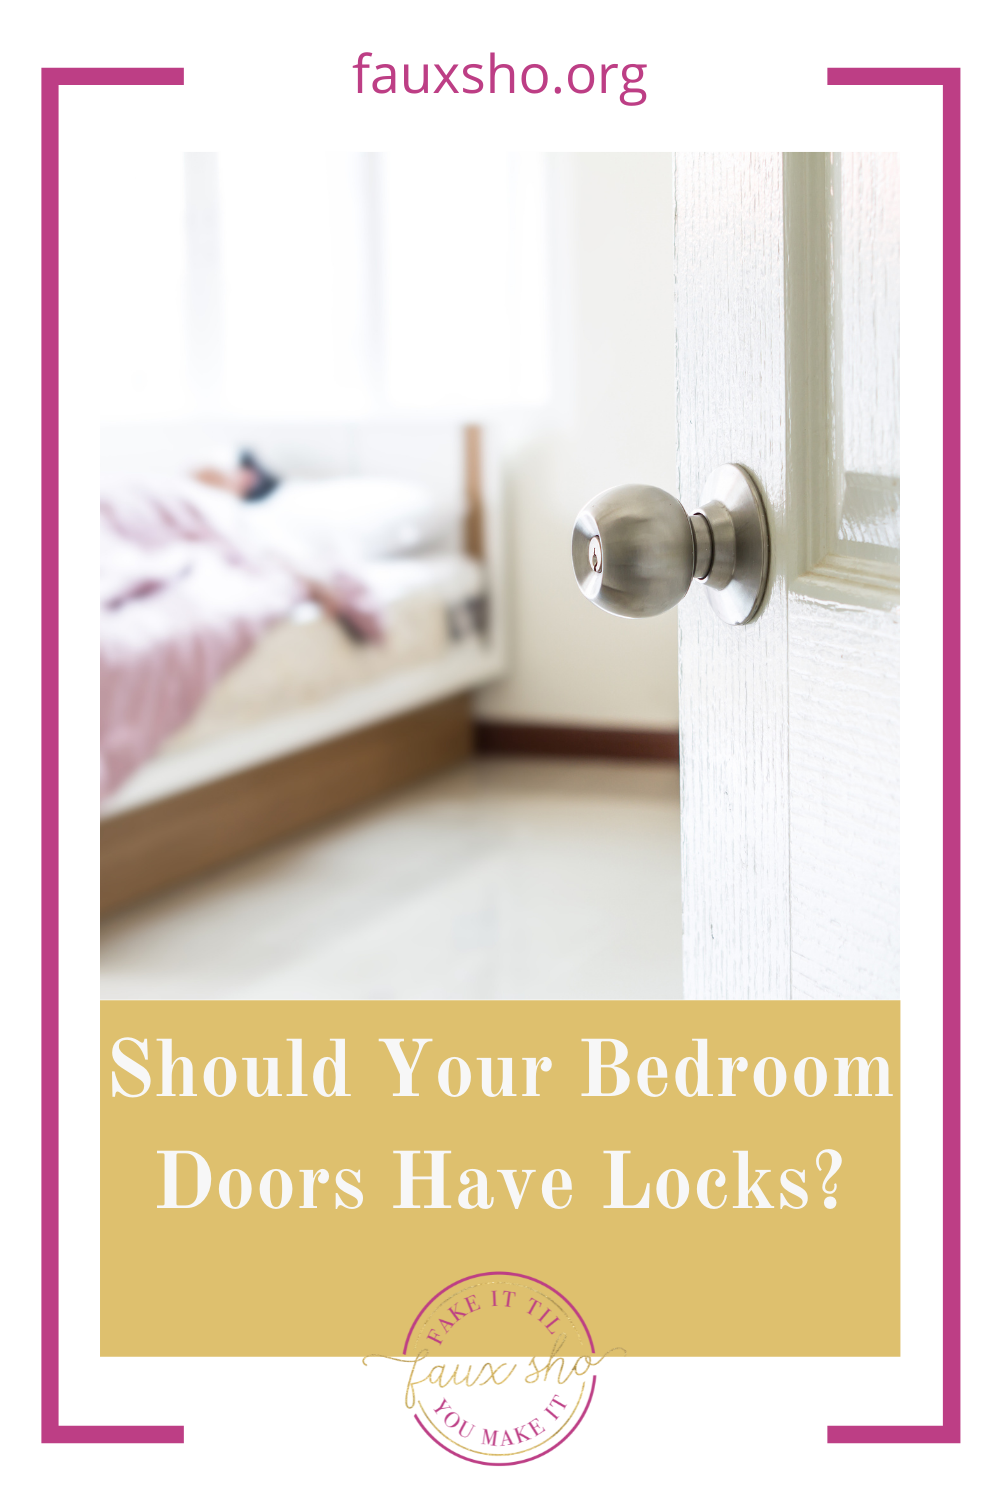 Fauxsho.com will fill you in on all the info you've been missing. Find hacks, ideas, and life tips that will help you get by a little more smoothly. Check out these things you should consider when deciding whether or not you should have locks on your bedroom doors.